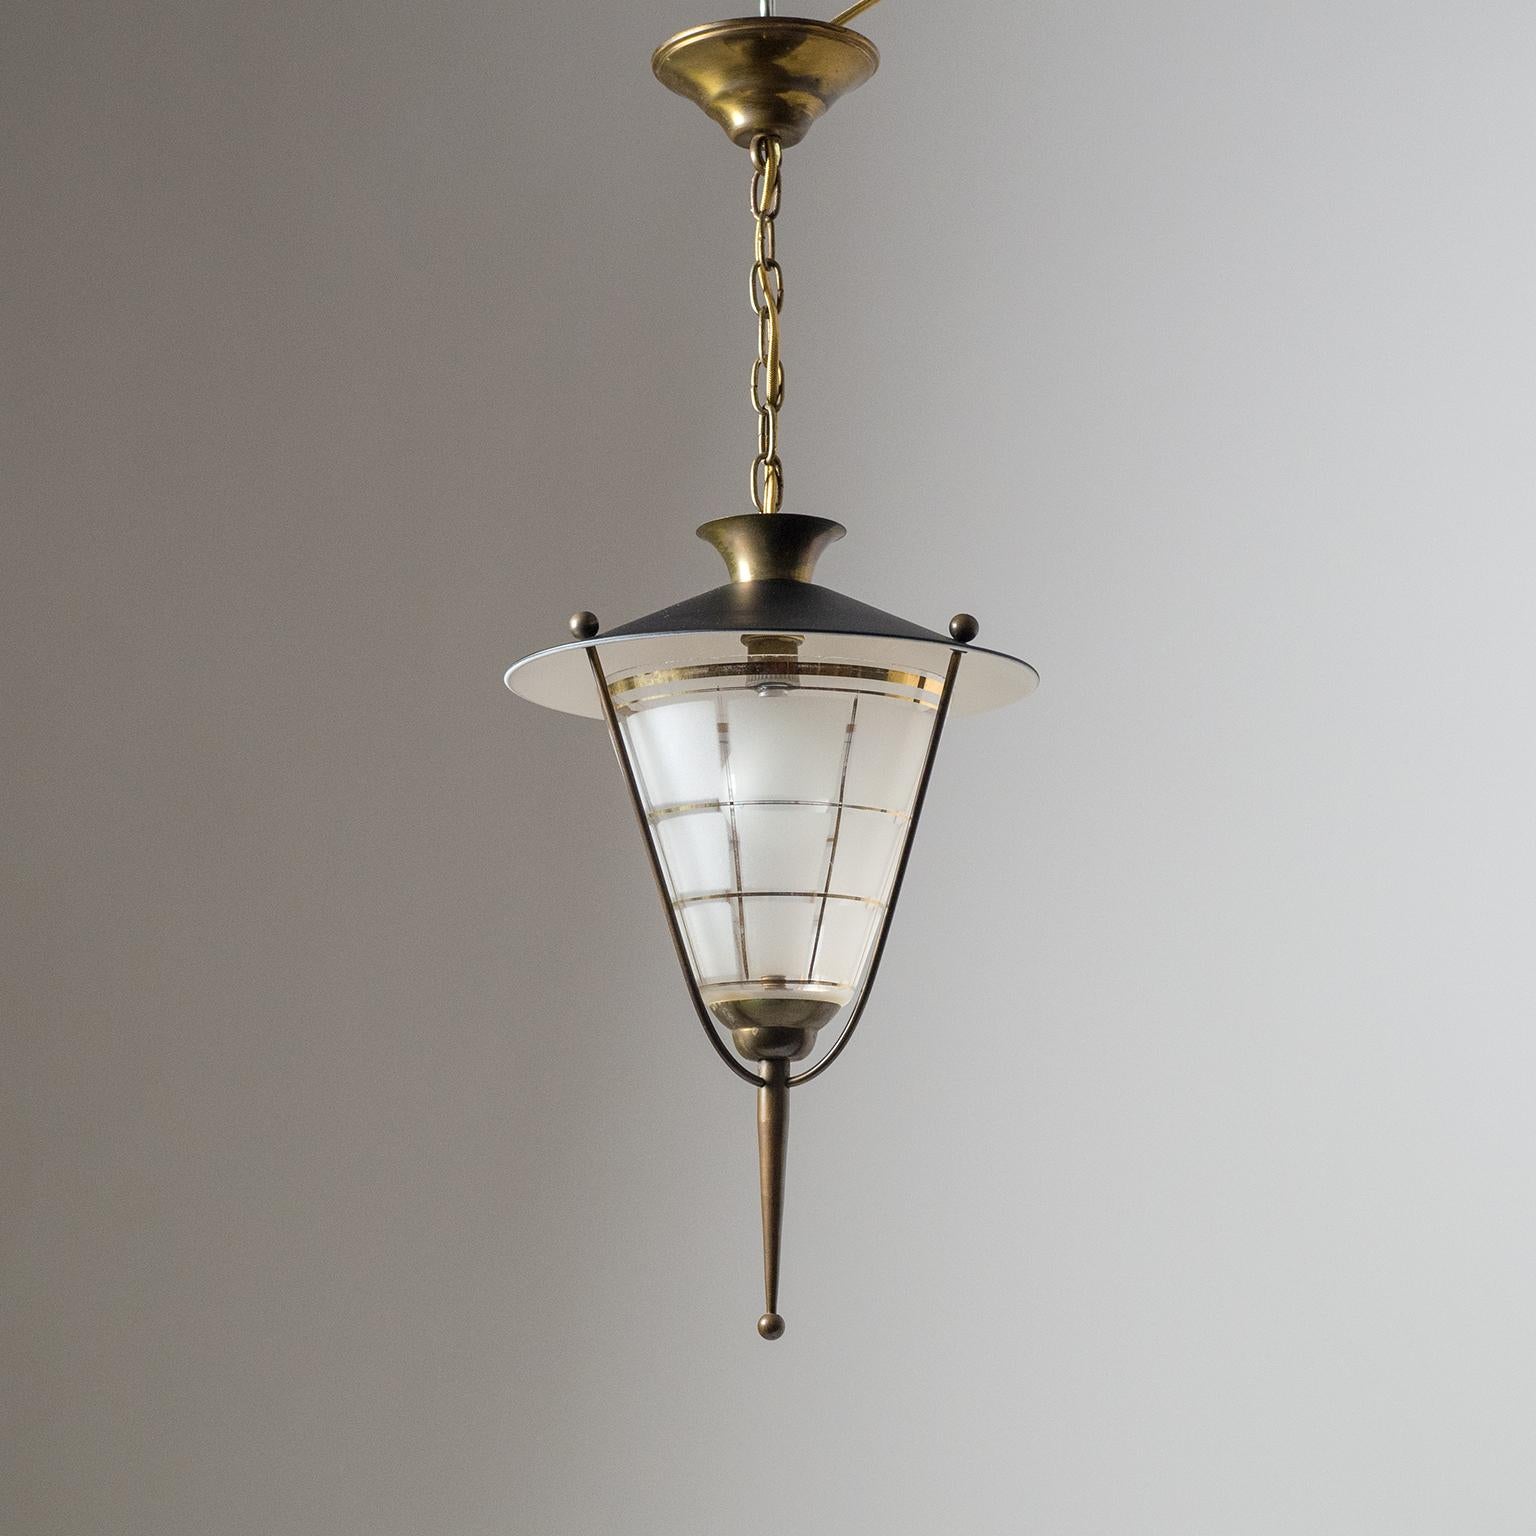 Classic French midcentury lantern or pendant. Black and white lacquered shade and a glass diffuser with geometric frosting and gold paint accents are held by brass hardware. Very nice condition with patina on the brass parts and some wear to the